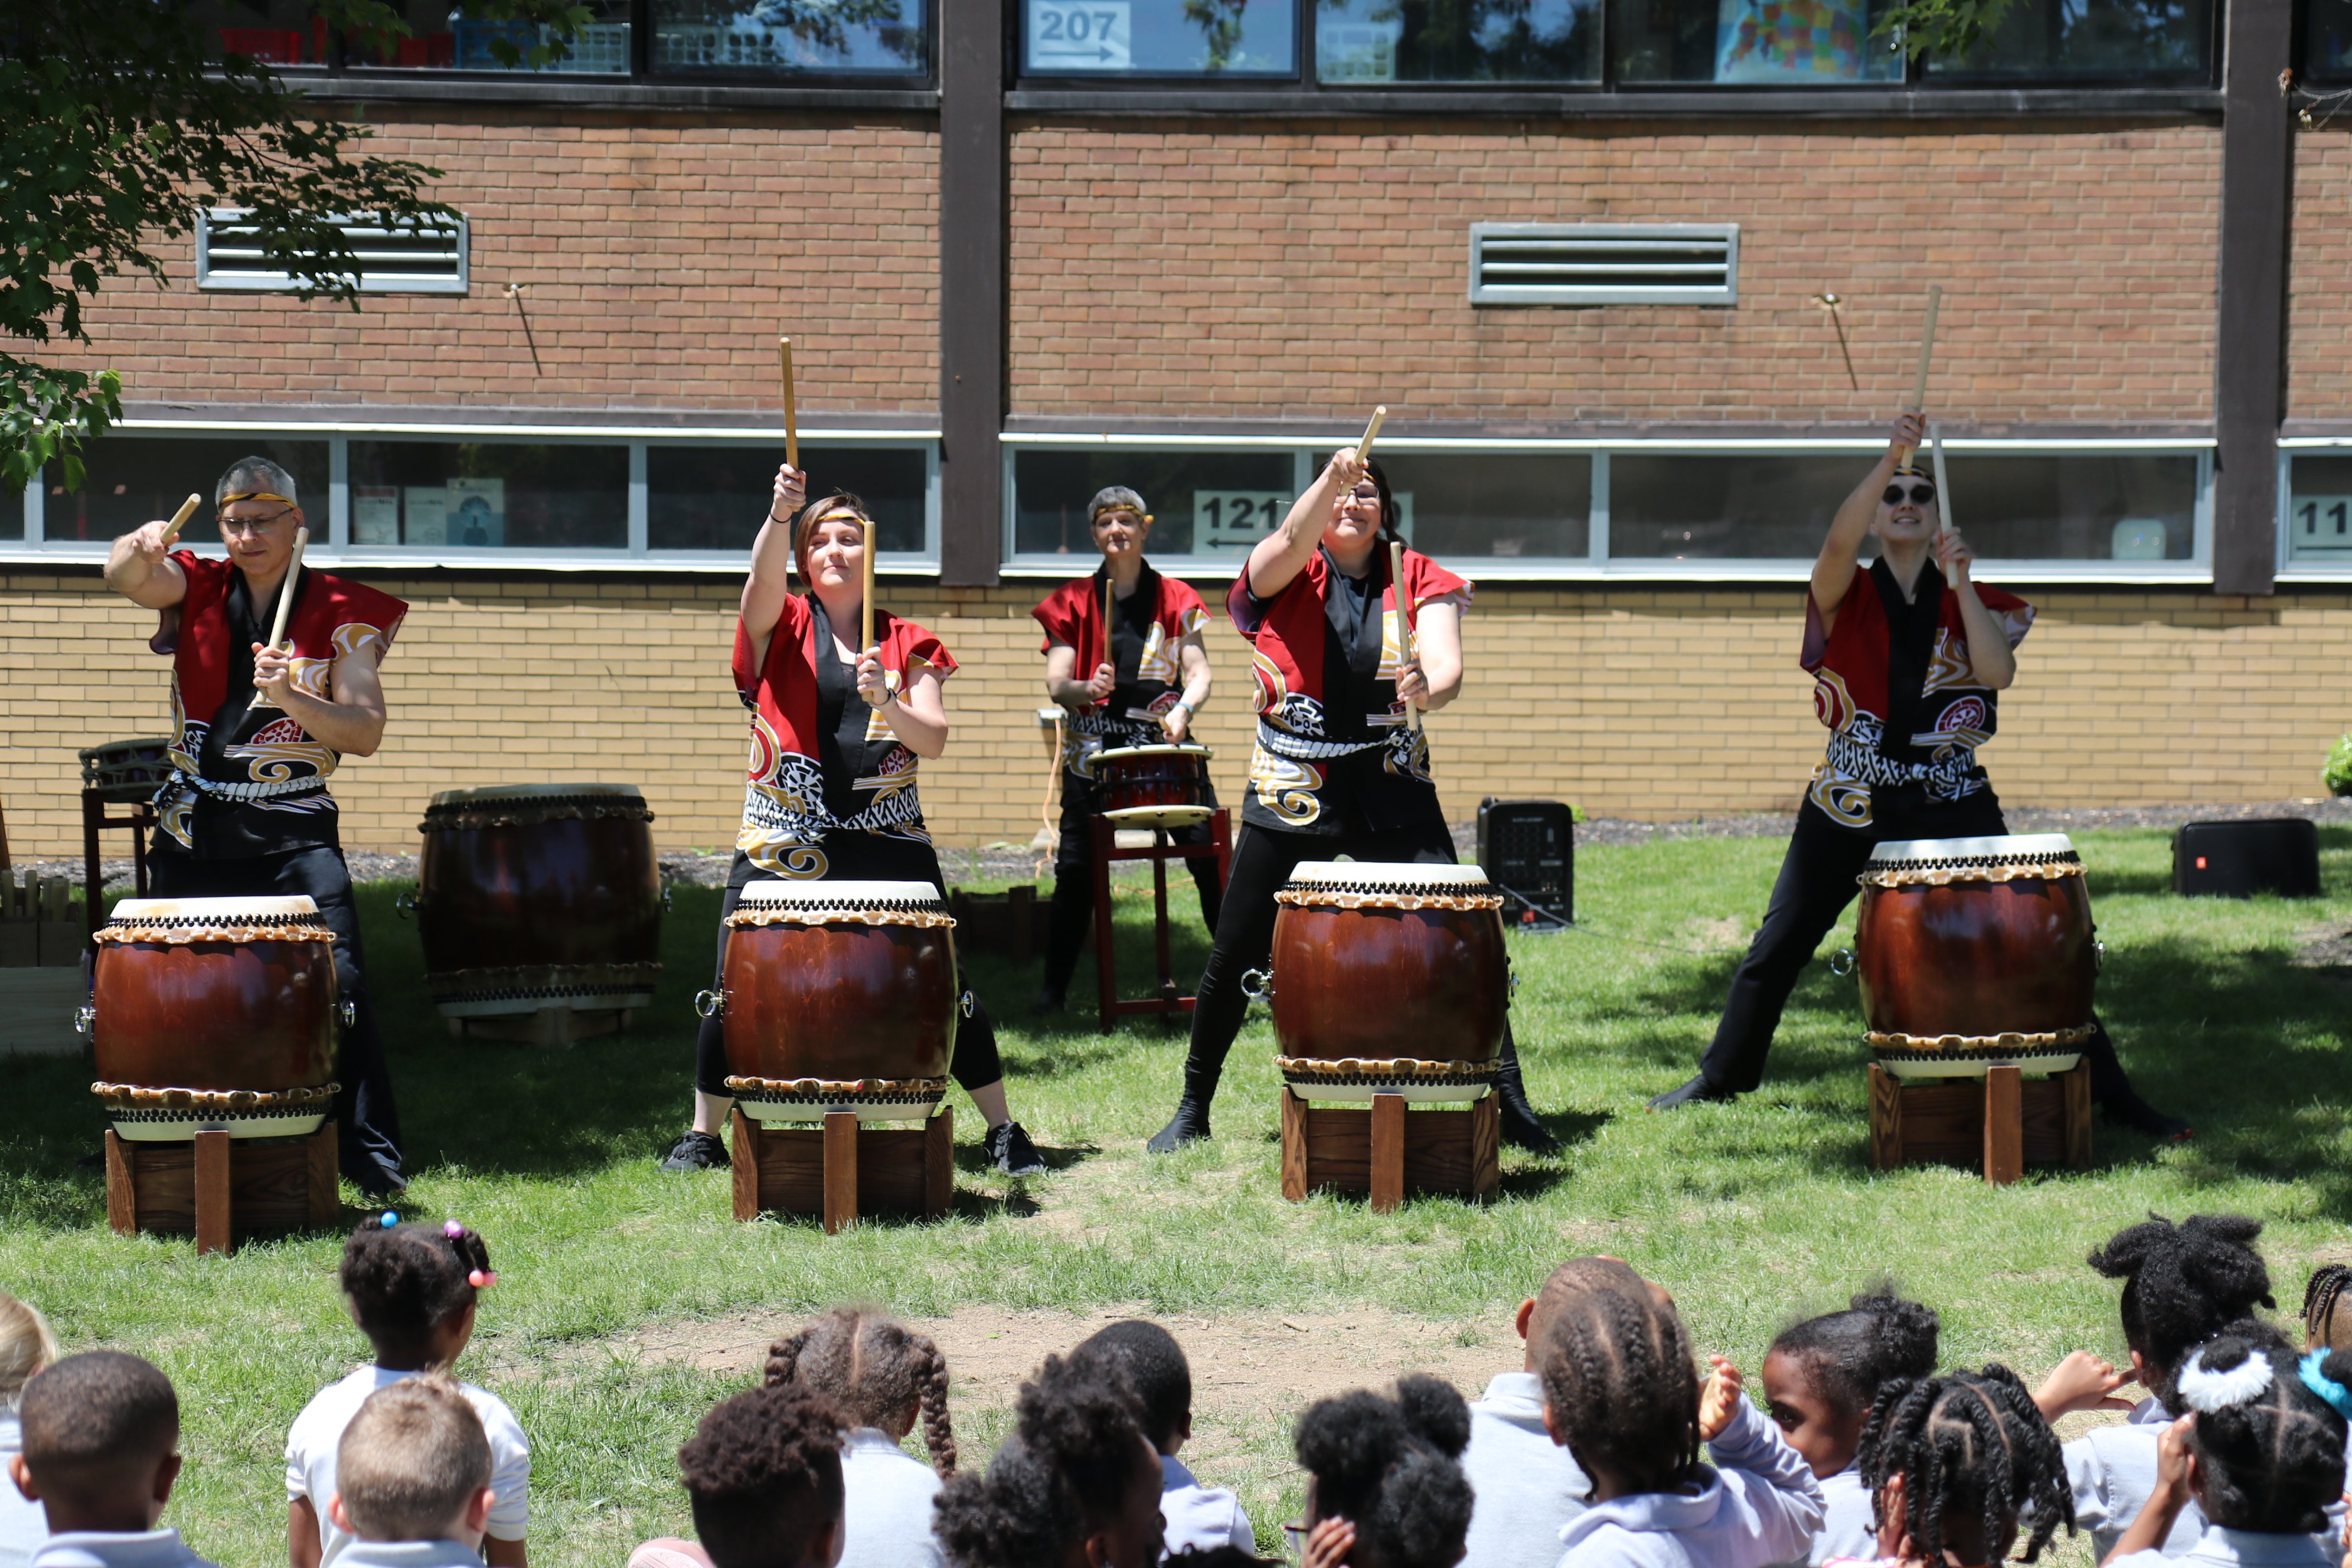 Pittsburgh Taiko members perform on a grass lawn in front of a school building. Several rows of elementary school students in uniforms are seen from behind, seated on the lawn facing the performers. Photo by Faruk Ozel.